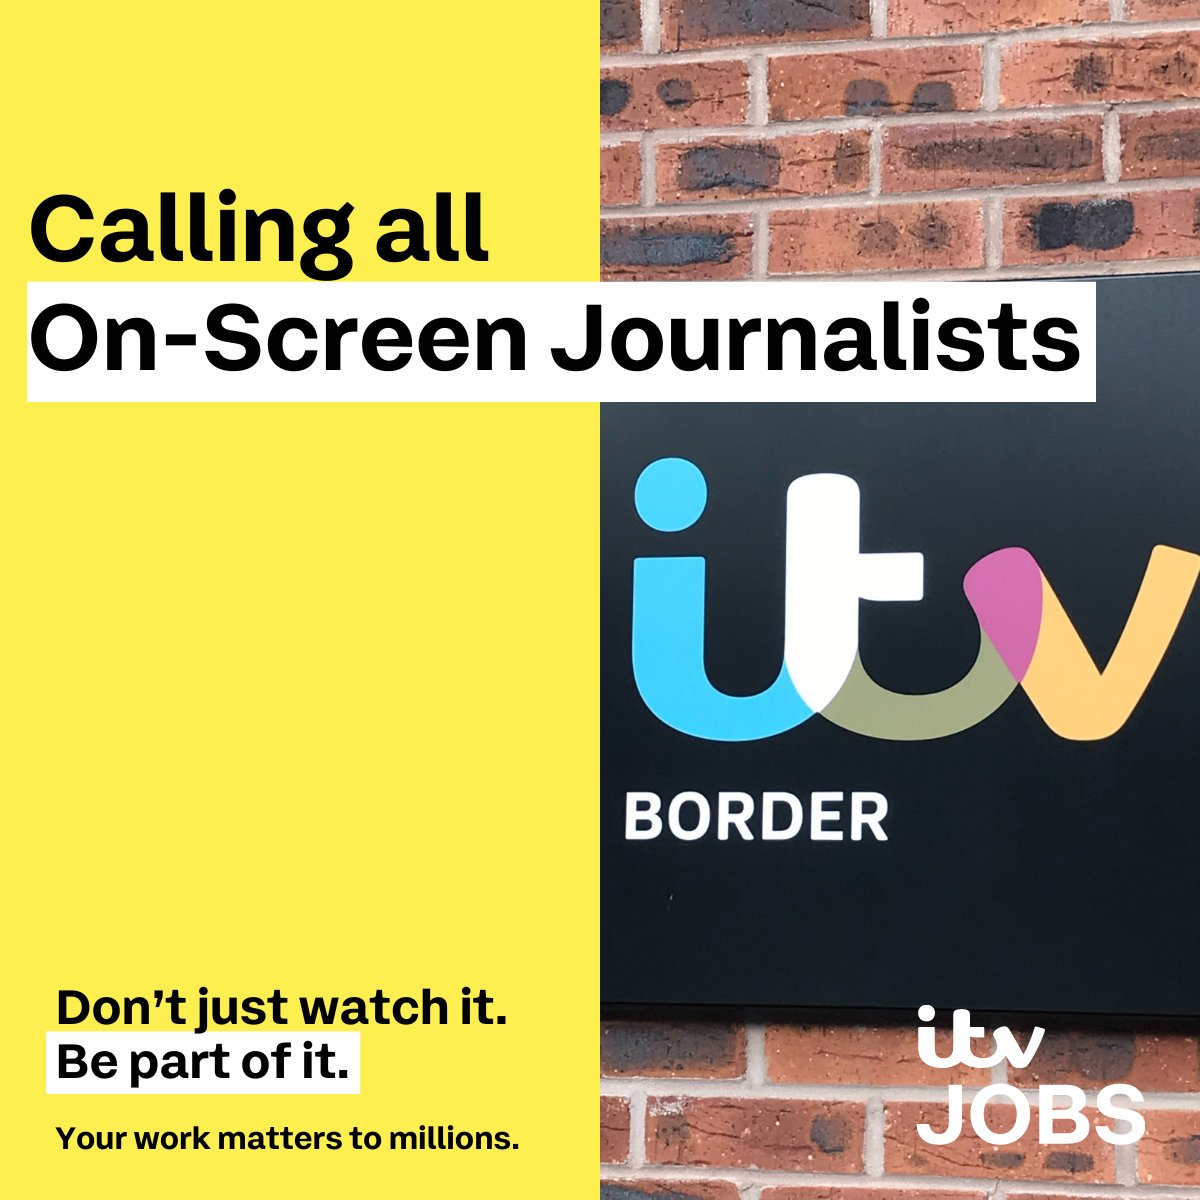 ITV News Border are now recruiting for an On-Screen Journalist with self-shooting, digital and editing experience to join their busy news patch. This is a primarily remote role based in West Cumbria. Apply here with your most recent showreel - lnkd.in/ee2xhz8a